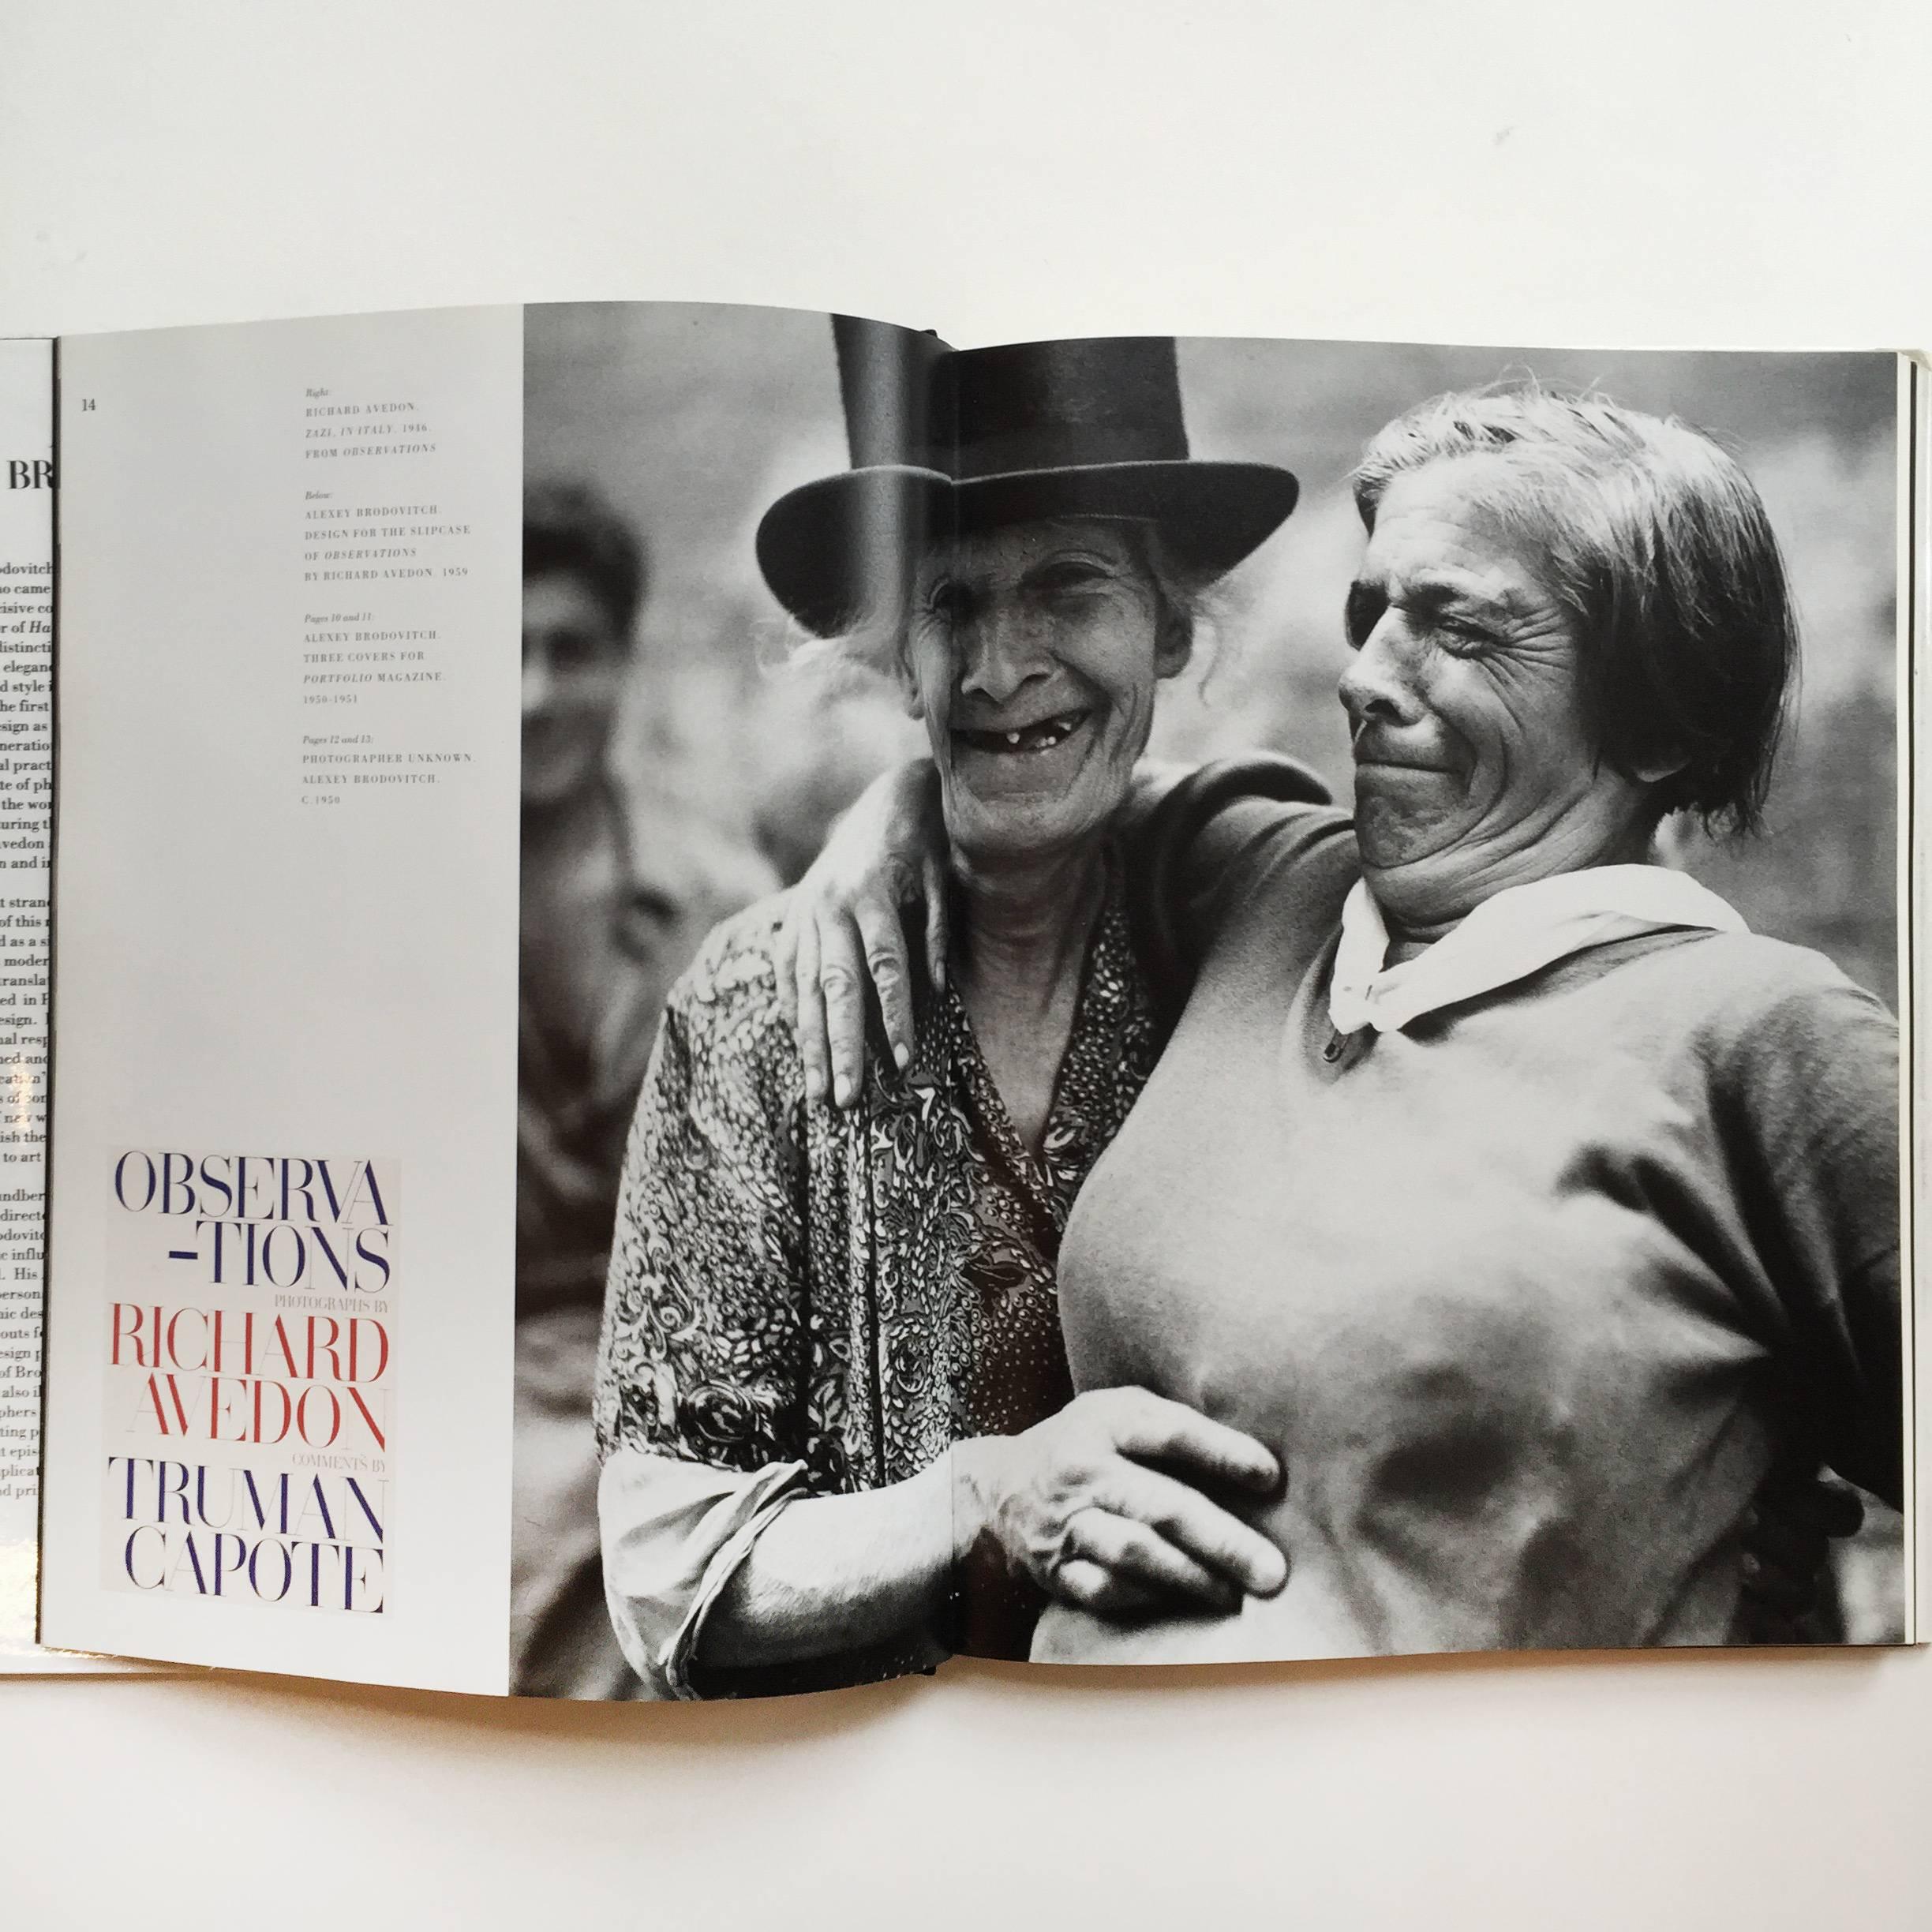 First edition, published by Abrams, New York, 1989.

Graphic designer and art director, Alexey Brodovitch, worked his way from near-poverty as a Russian émigré working in the Académie Vassilieff studios in Paris, with contemporaries such as